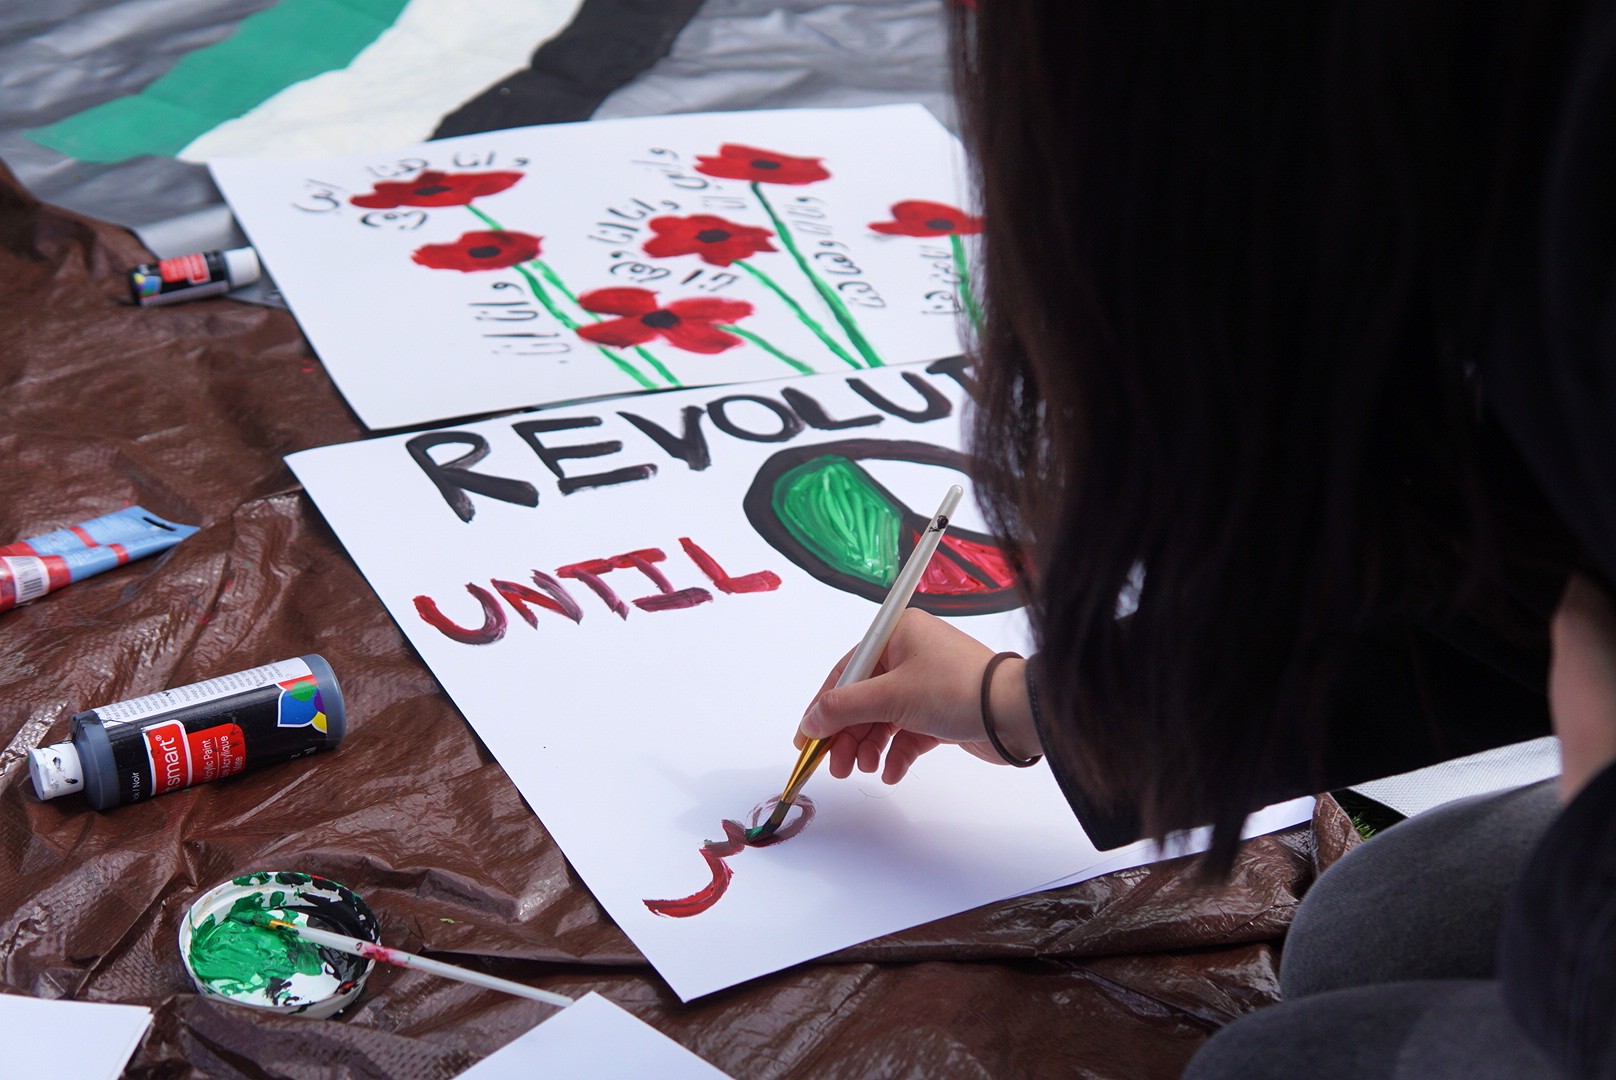 Several students made stickers, posters, and banners for Palestine (Azad Essa/MEE)